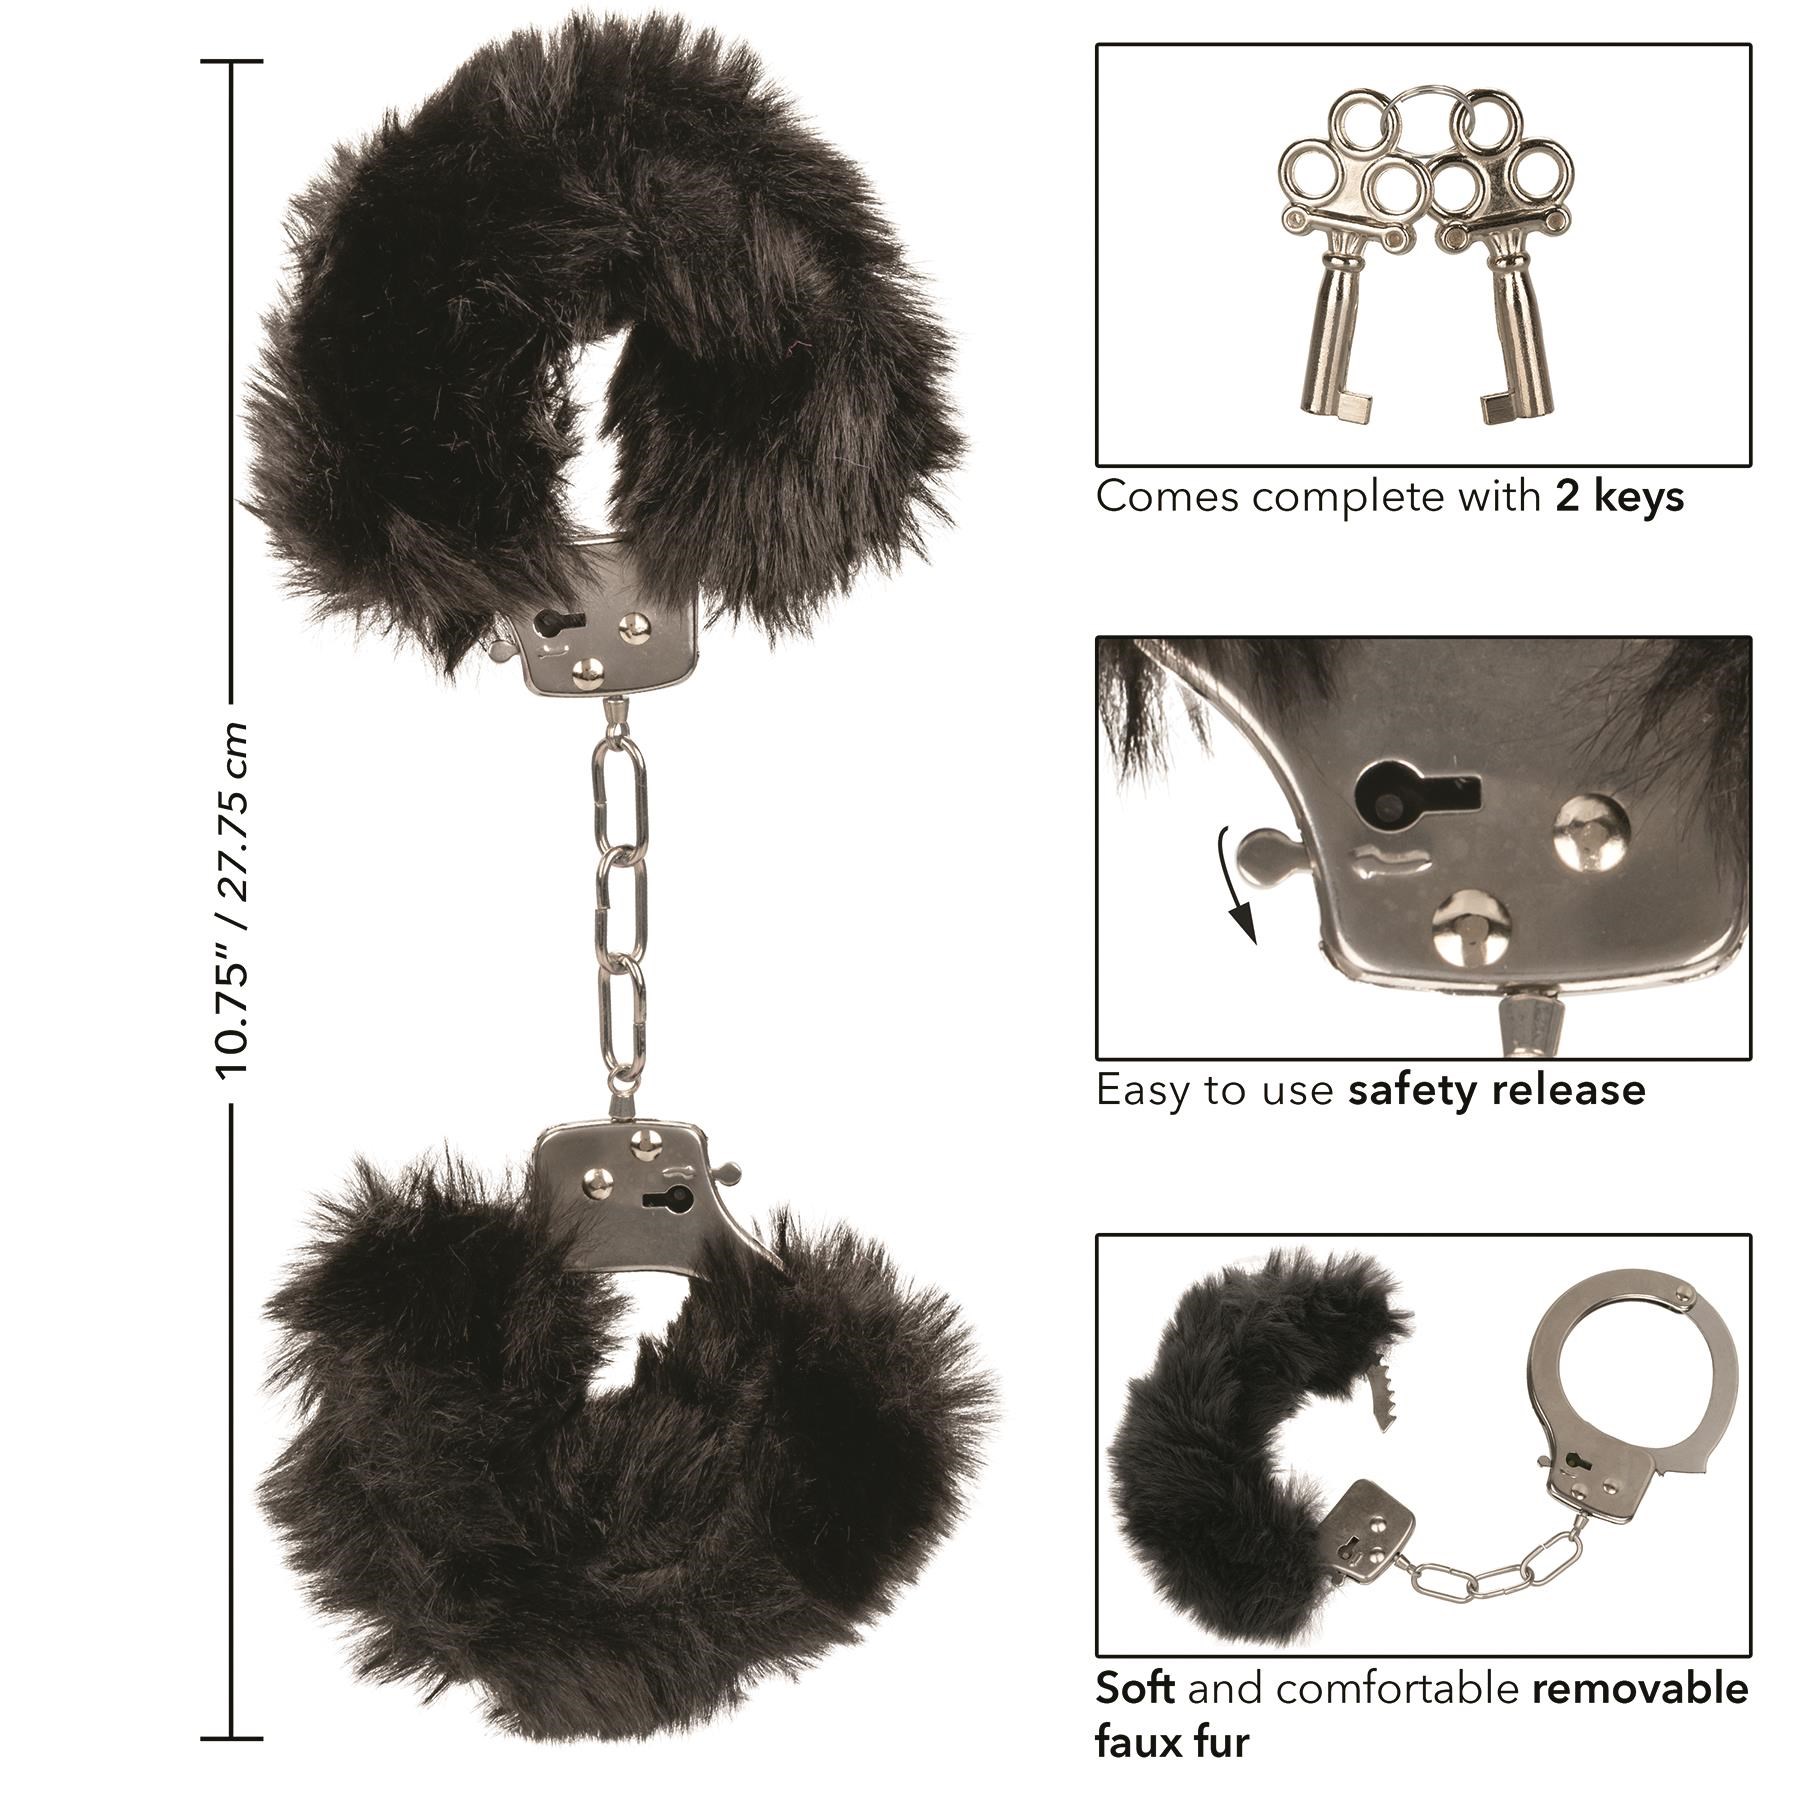 Ultra Furry Cuffs - Dimension and Instructions - Black